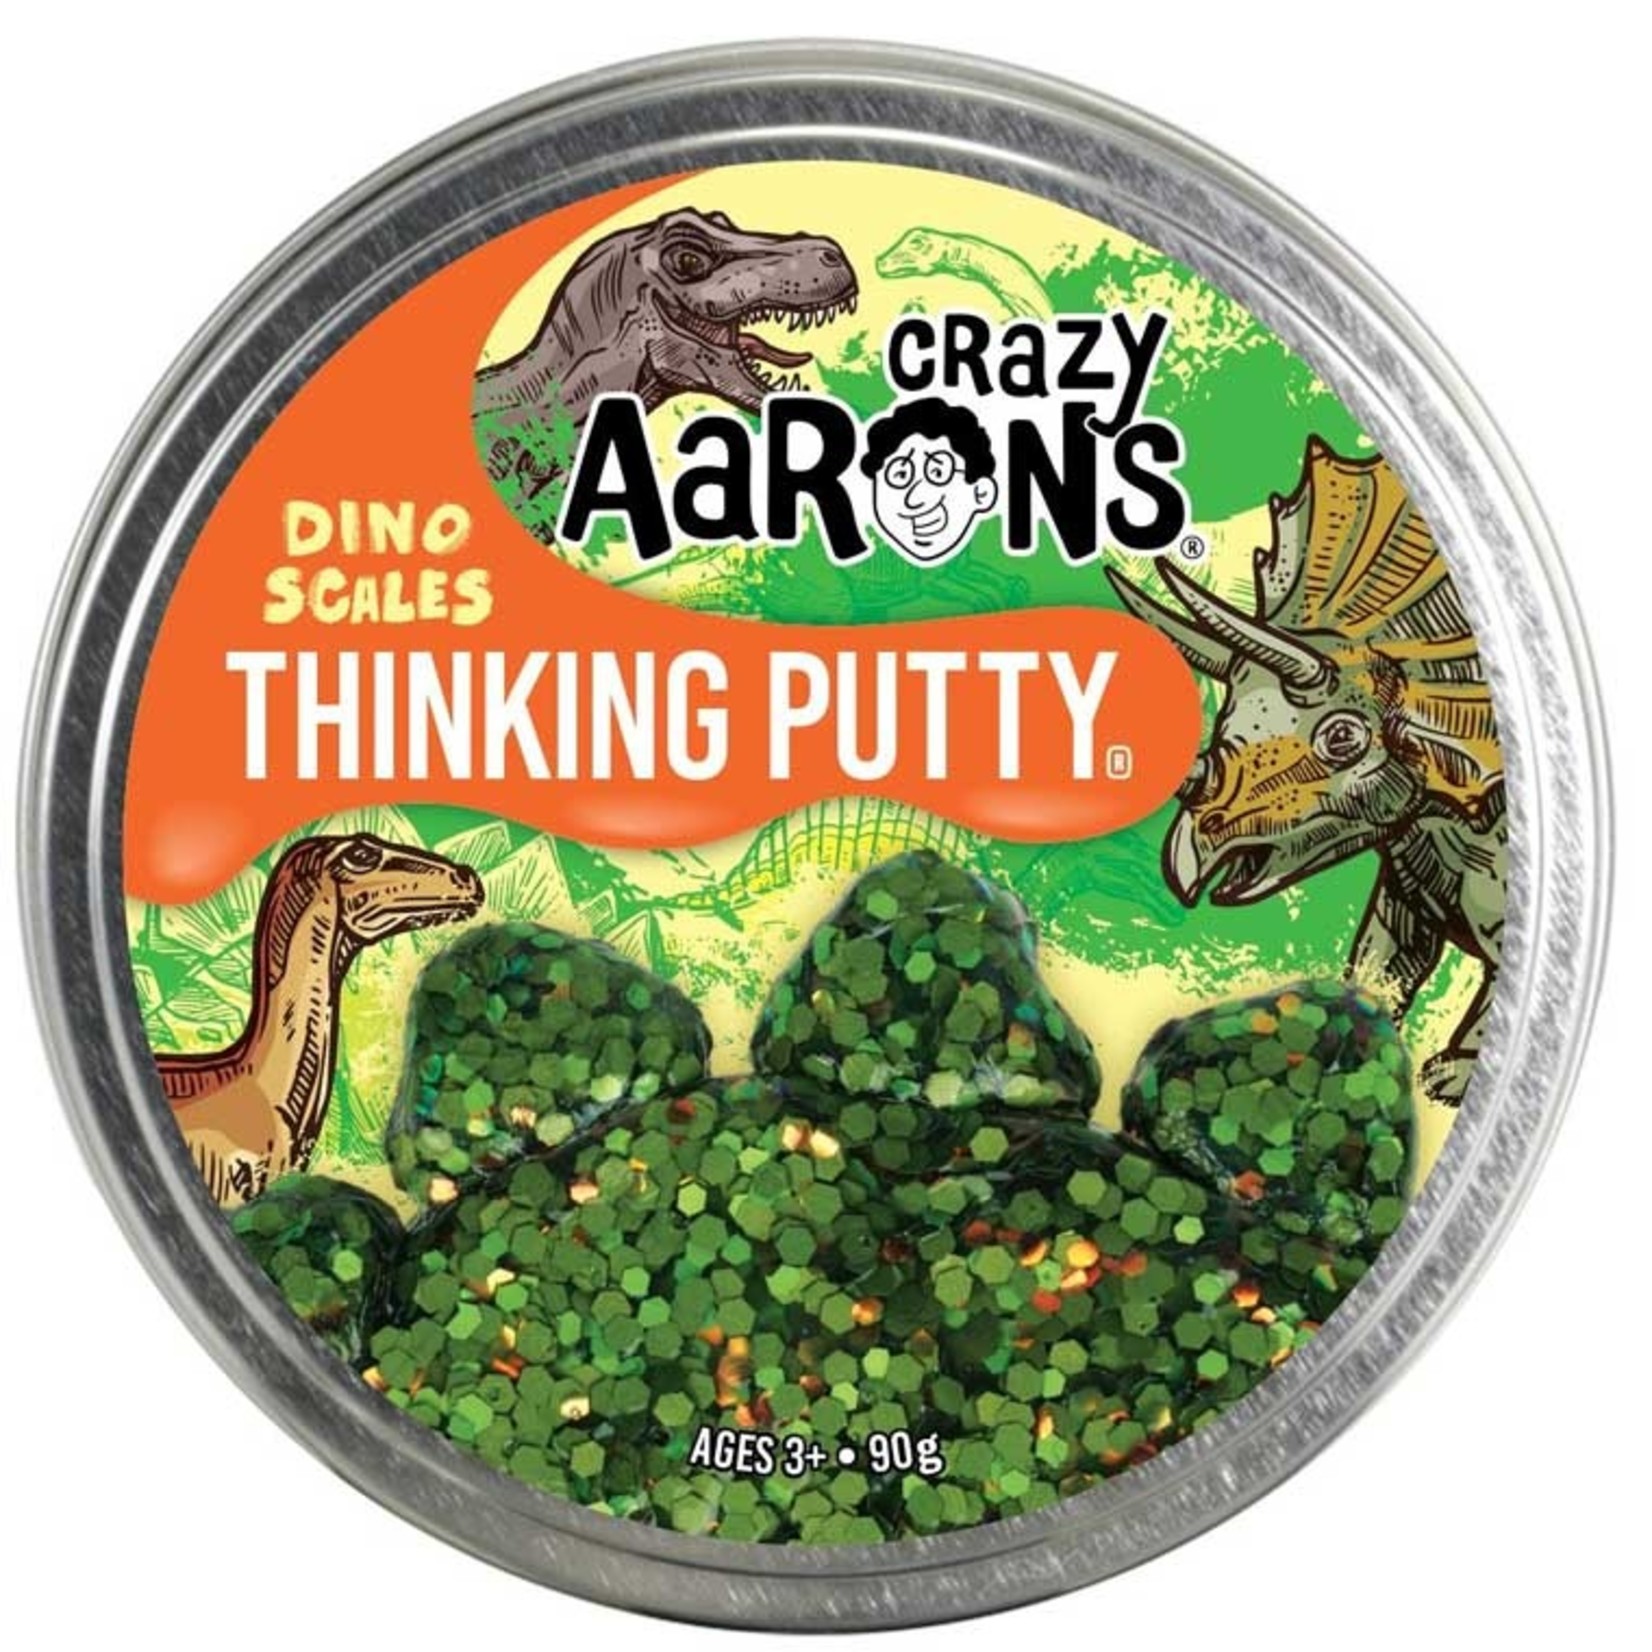 Crazy Aaron's Thinking Putty Dino Scales